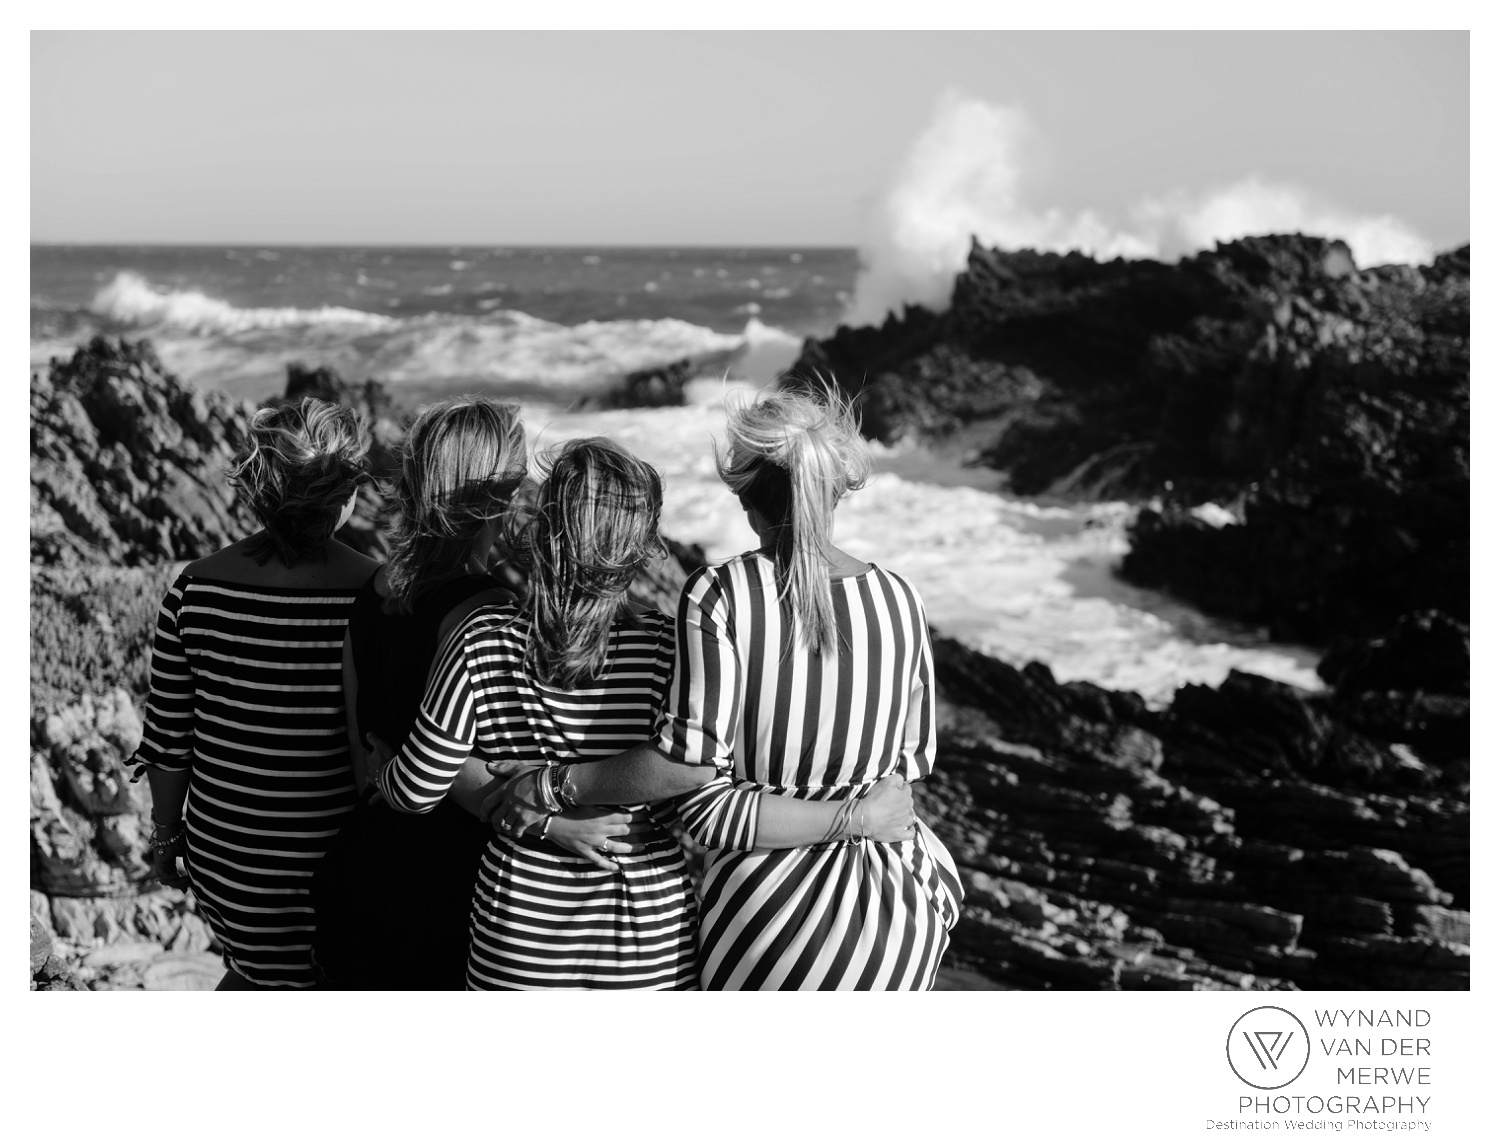 Lize and her family Kleinbaai South Africa